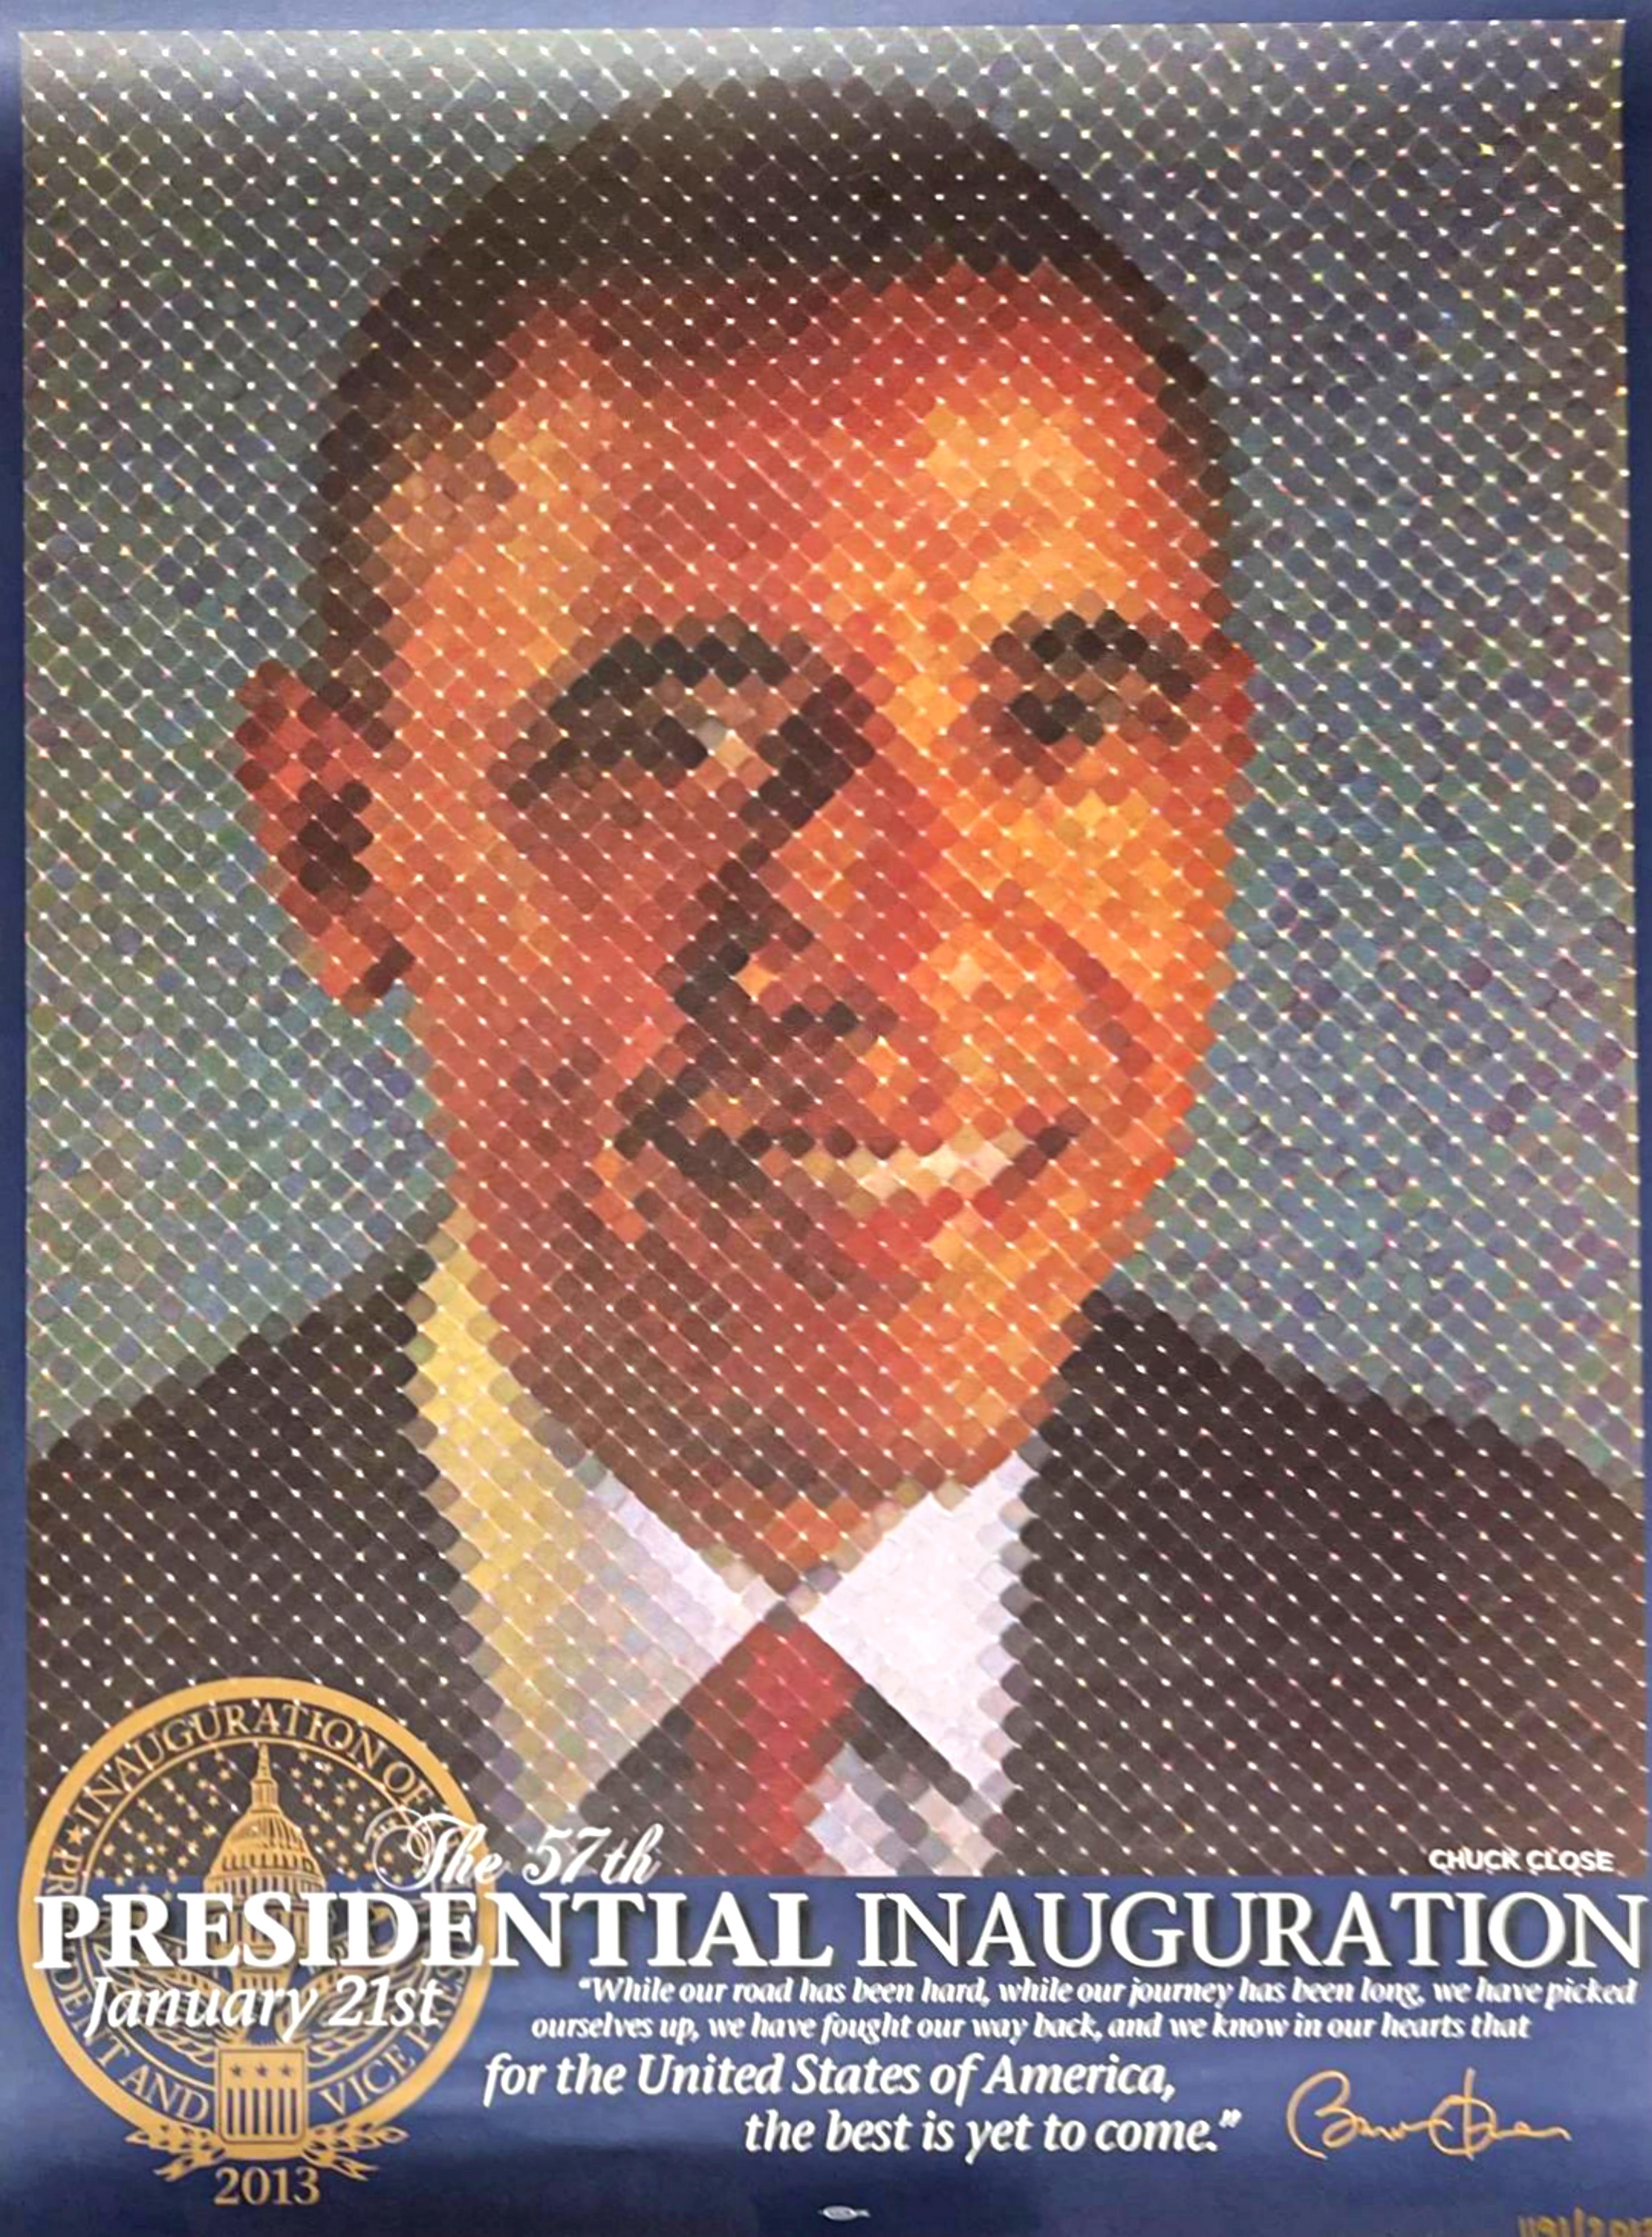 Chuck Close Abstract Print - The 57th Presidential Inauguration, limited edition, plate signed Barack Obama 